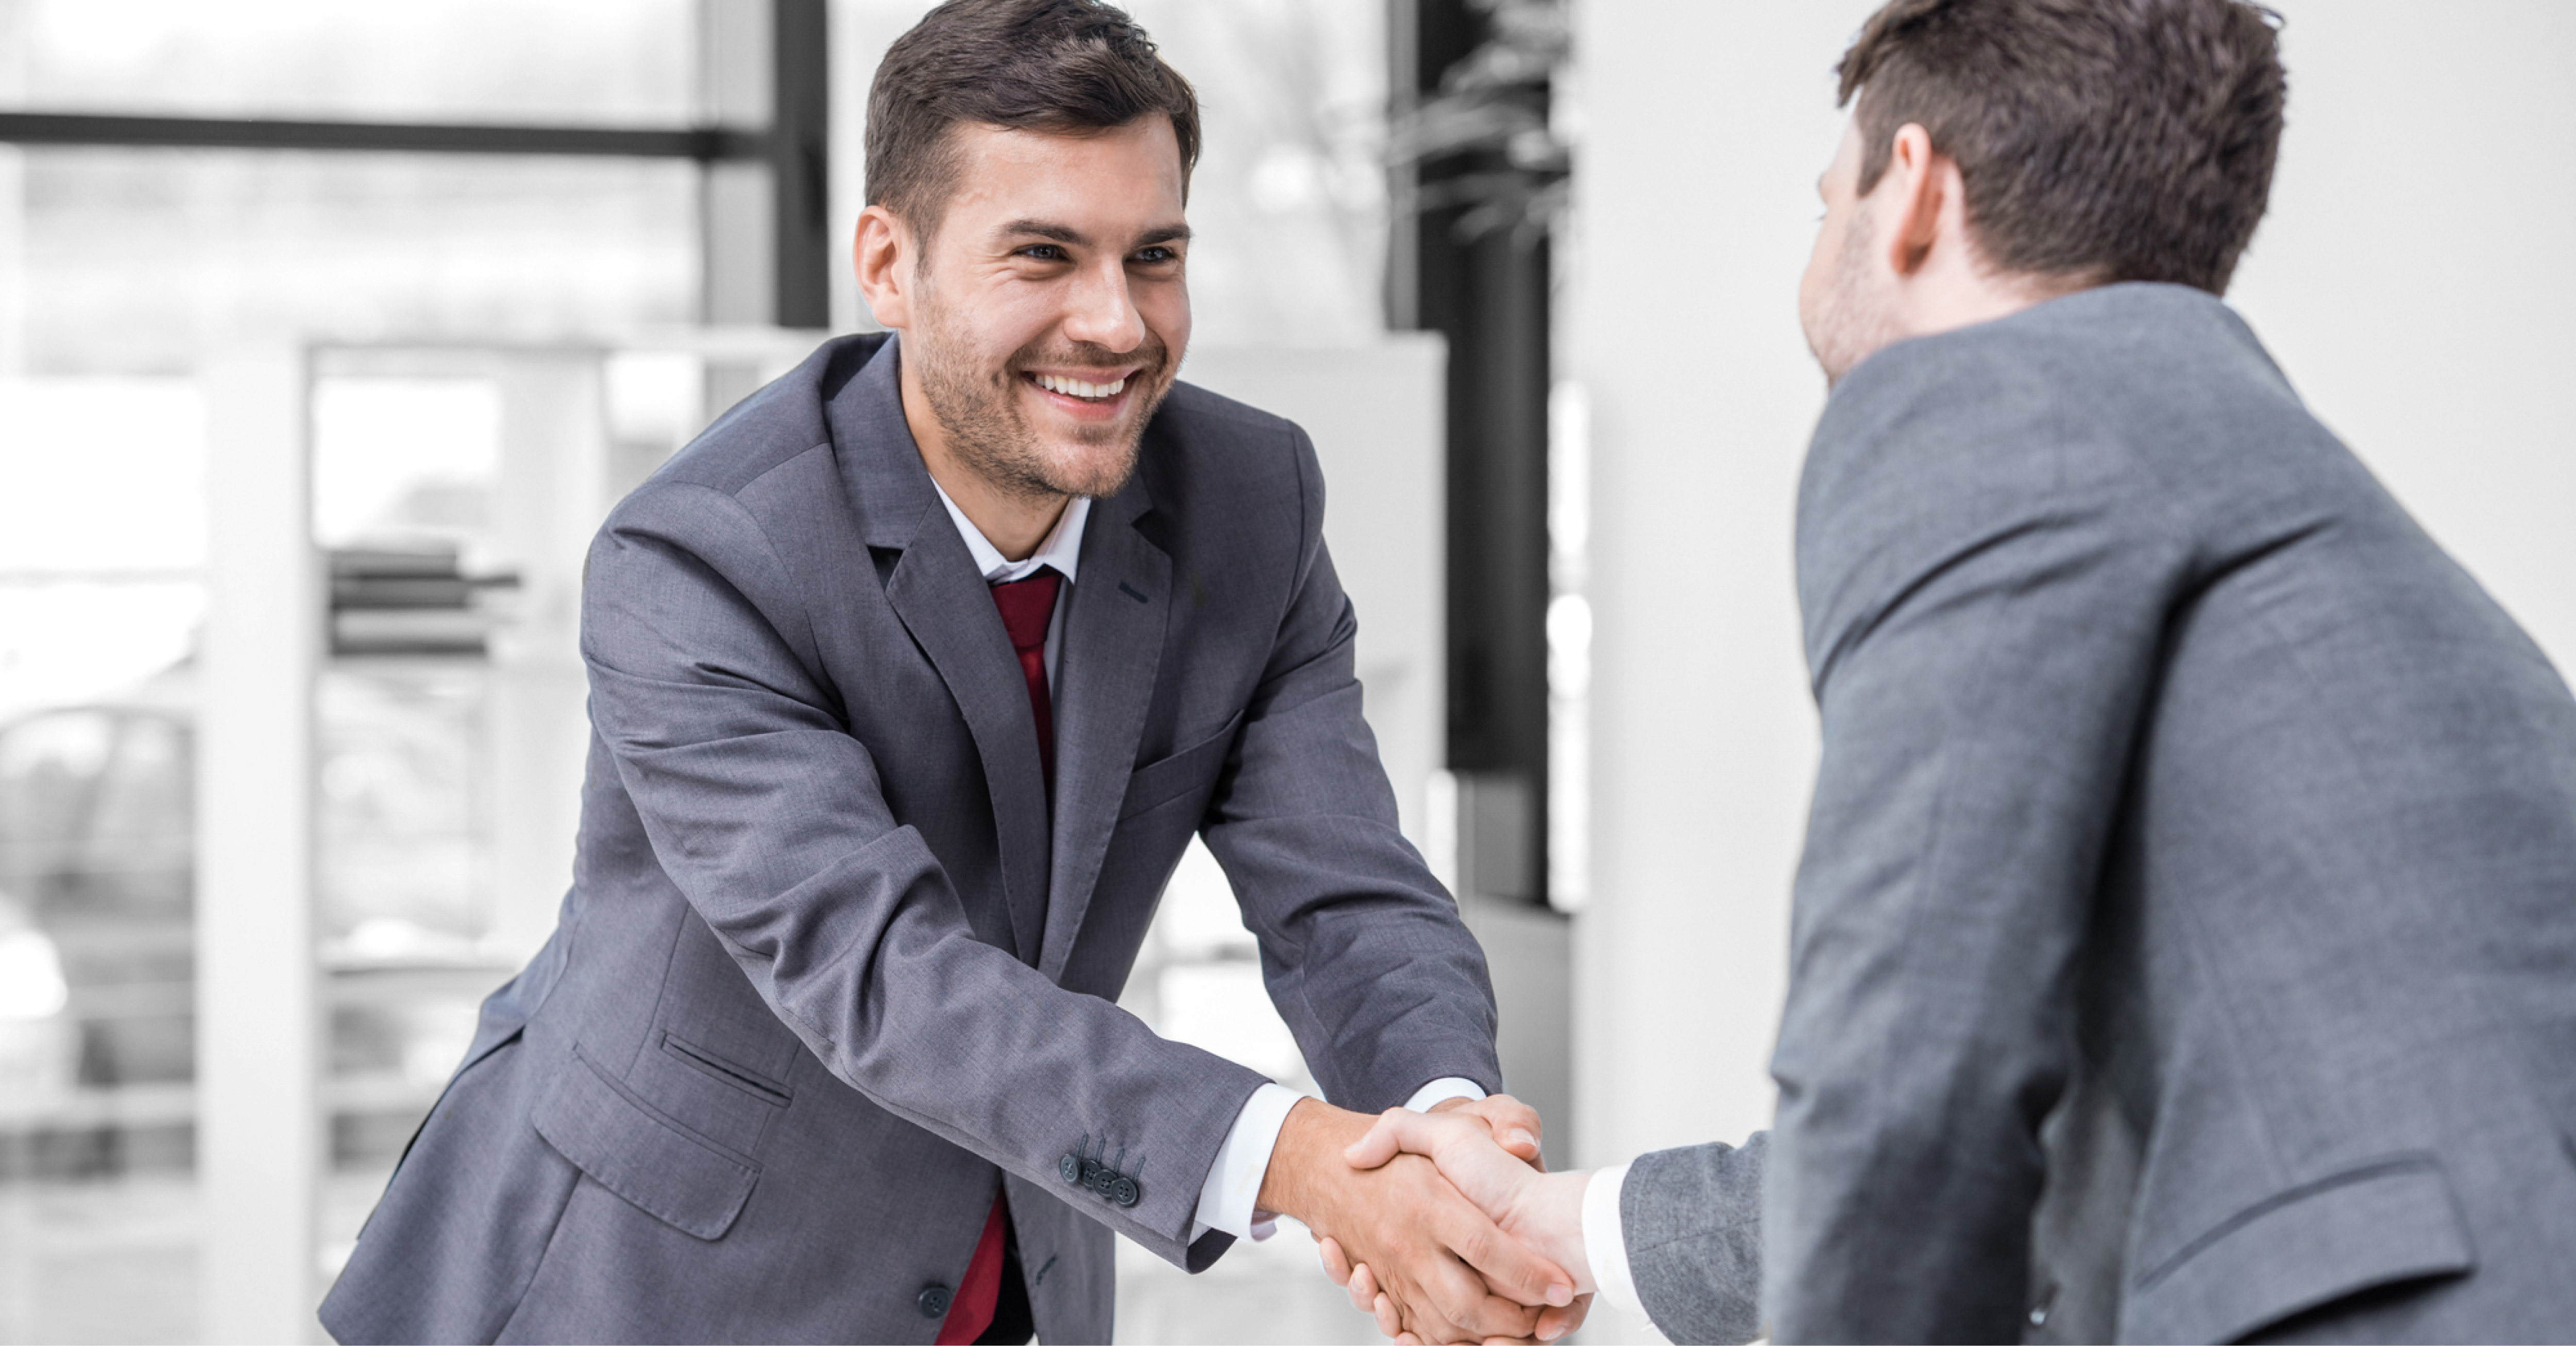 How To Start A New Business Partnership